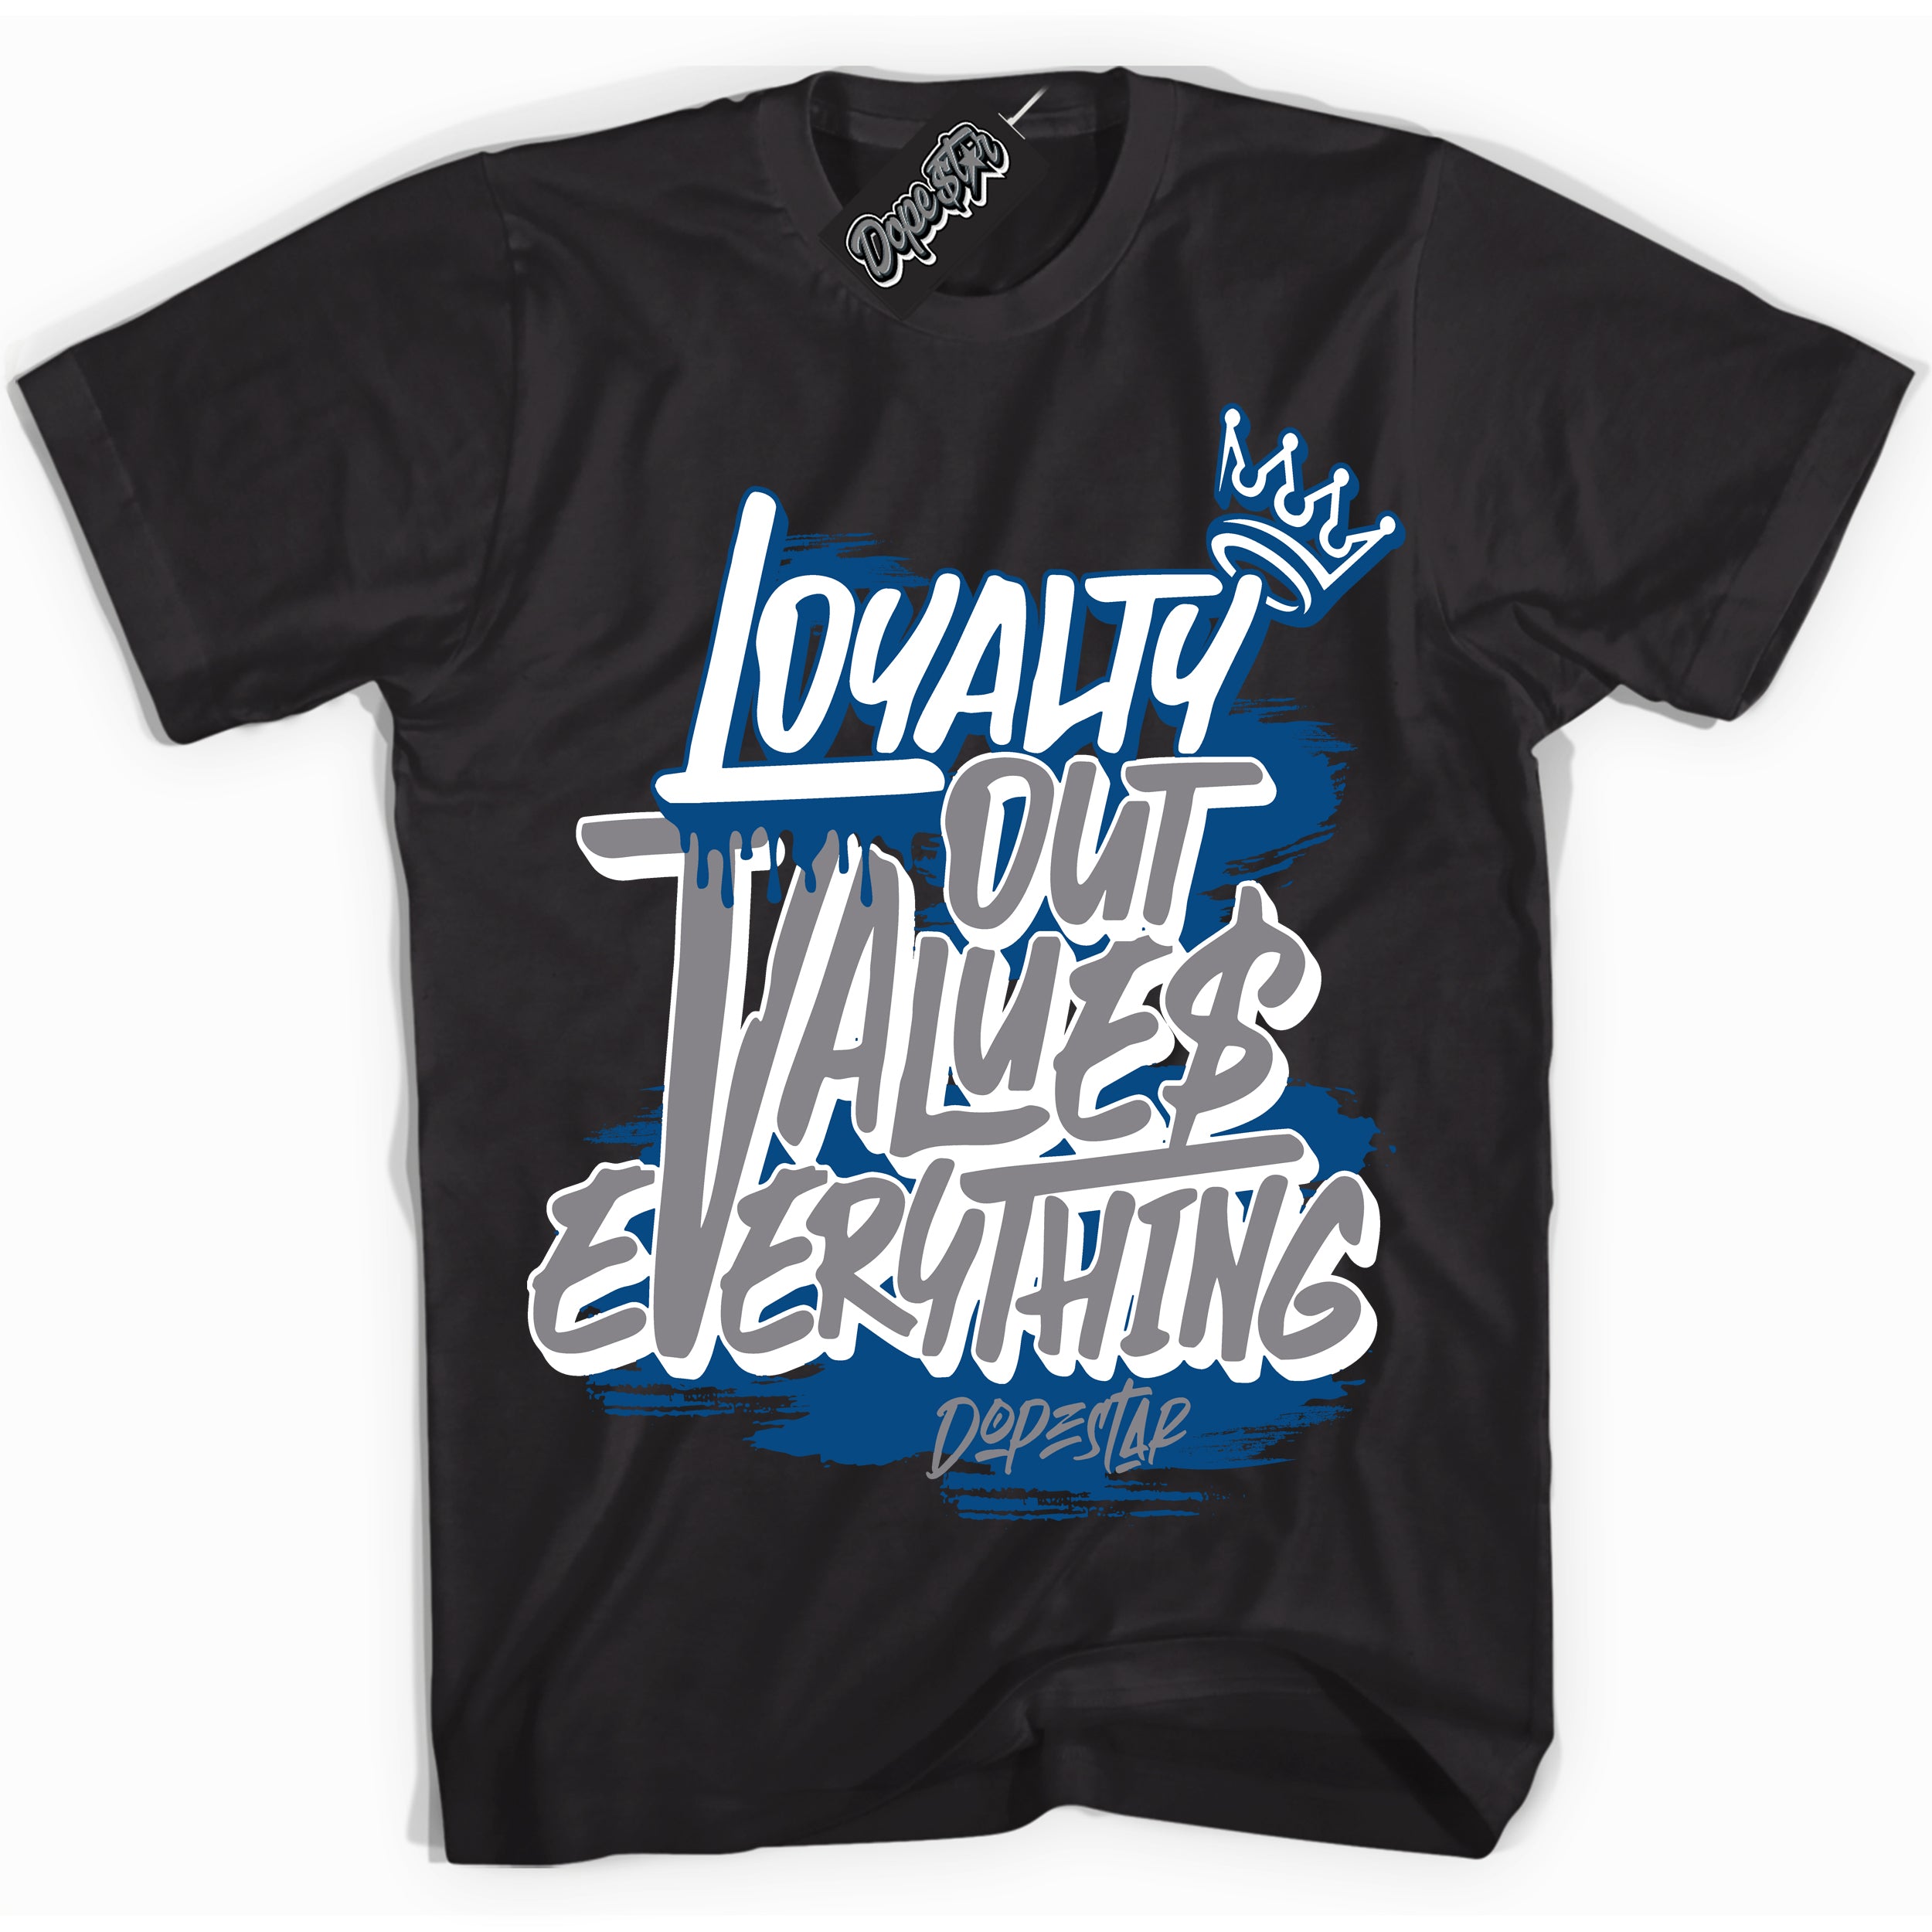 Cool Black Shirt with “ Loyalty Out Values Everything” design that perfectly matches Low True Blue 1s Sneakers.